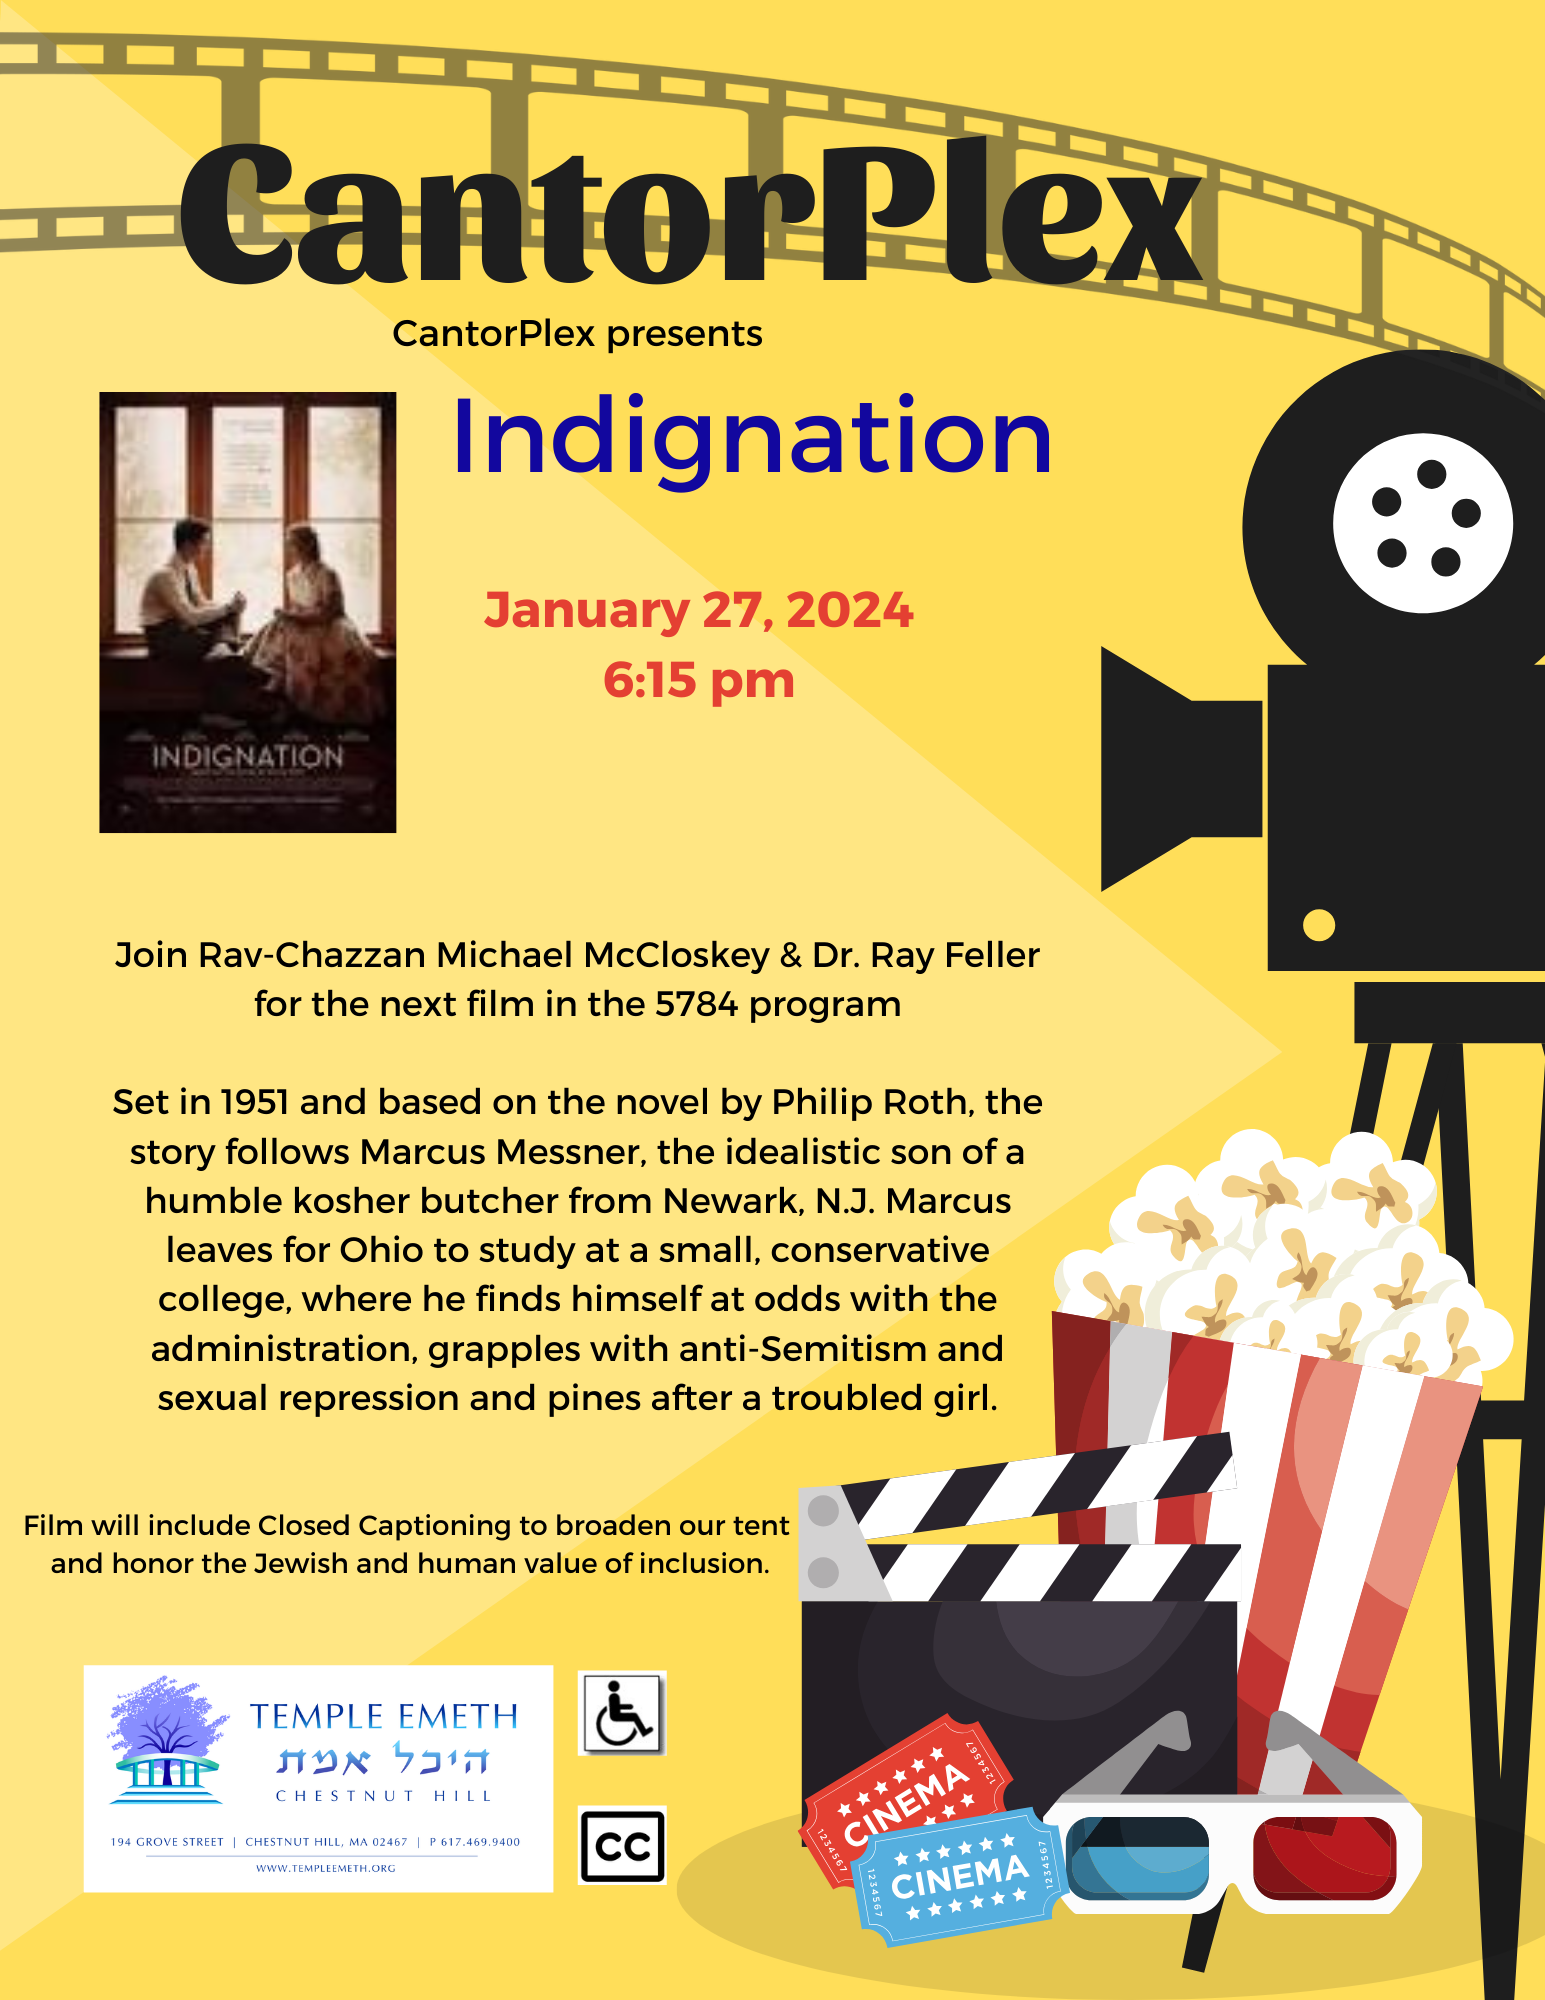 Cantor-Plex Film Festival presents: Coming-of-age Tales